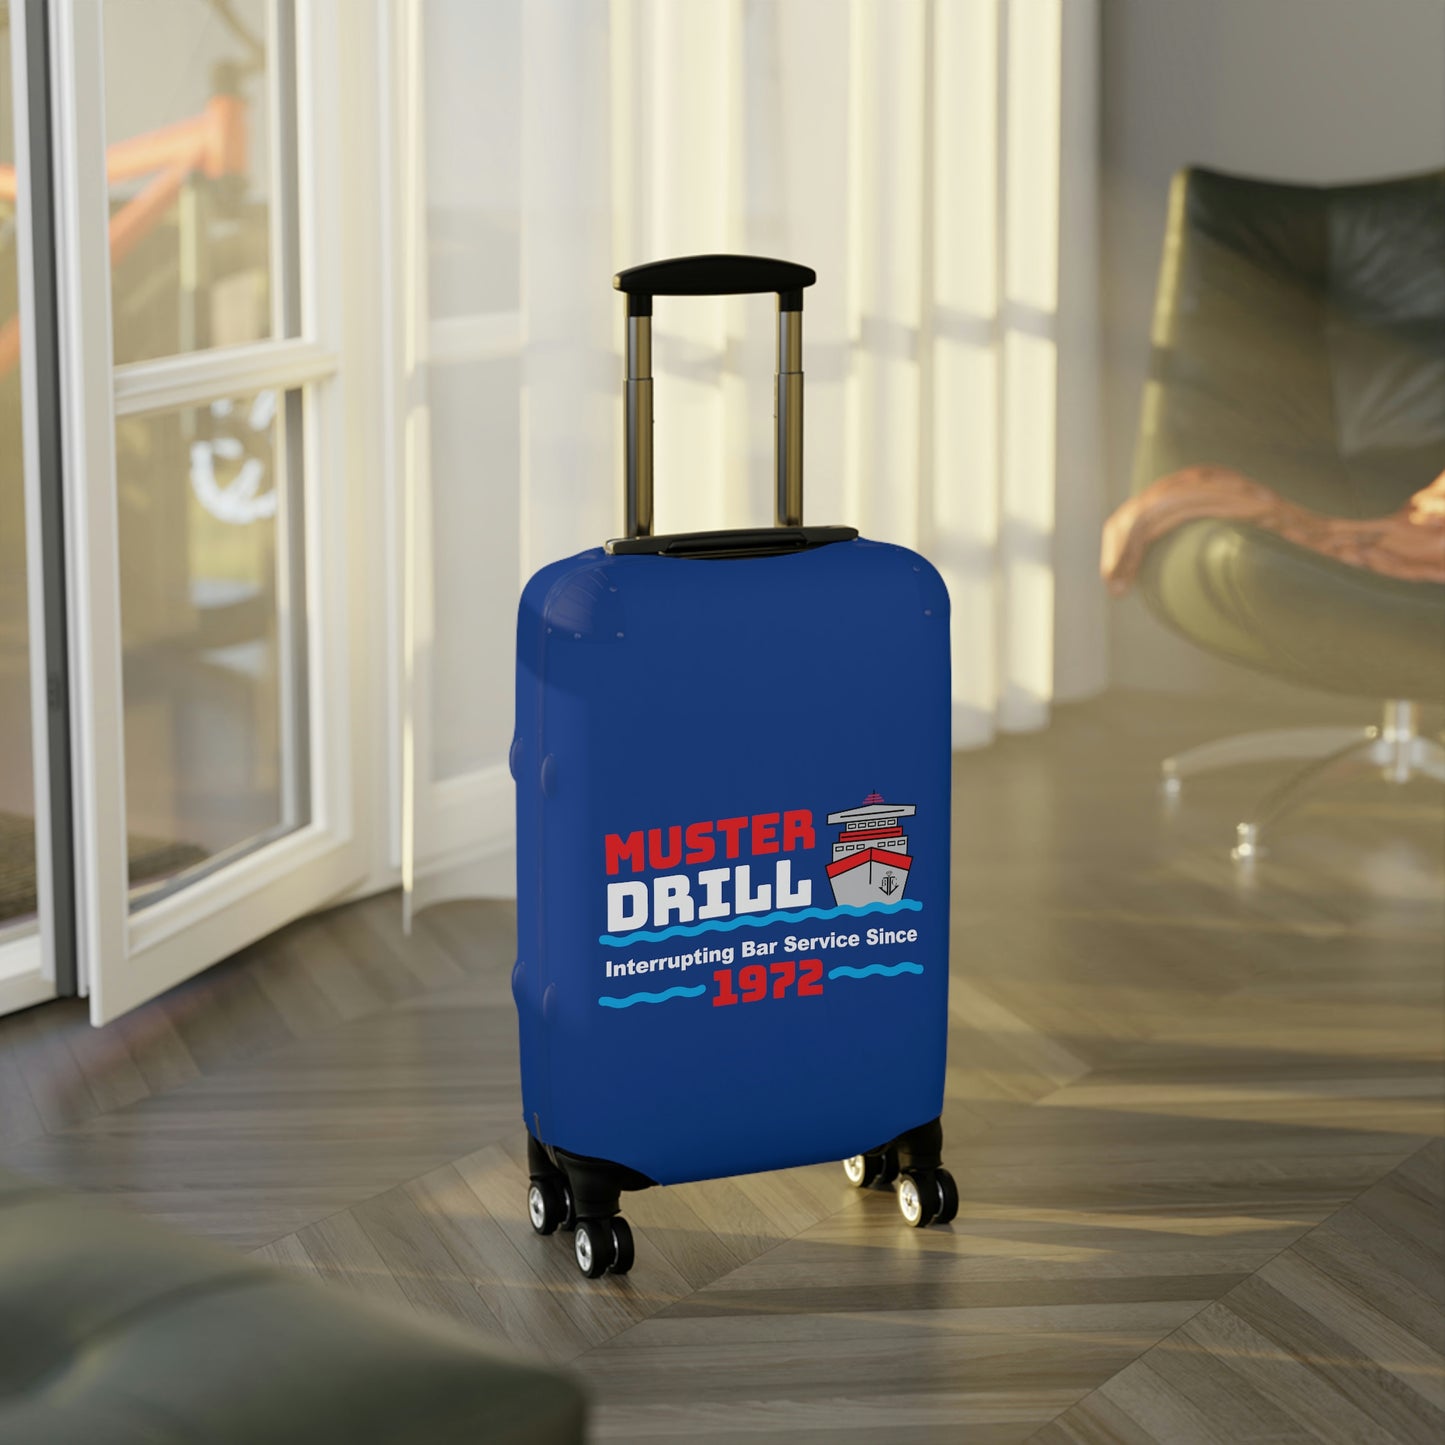 Muster Drill Interrupting Bar Service Since 1972 –Luggage Cover